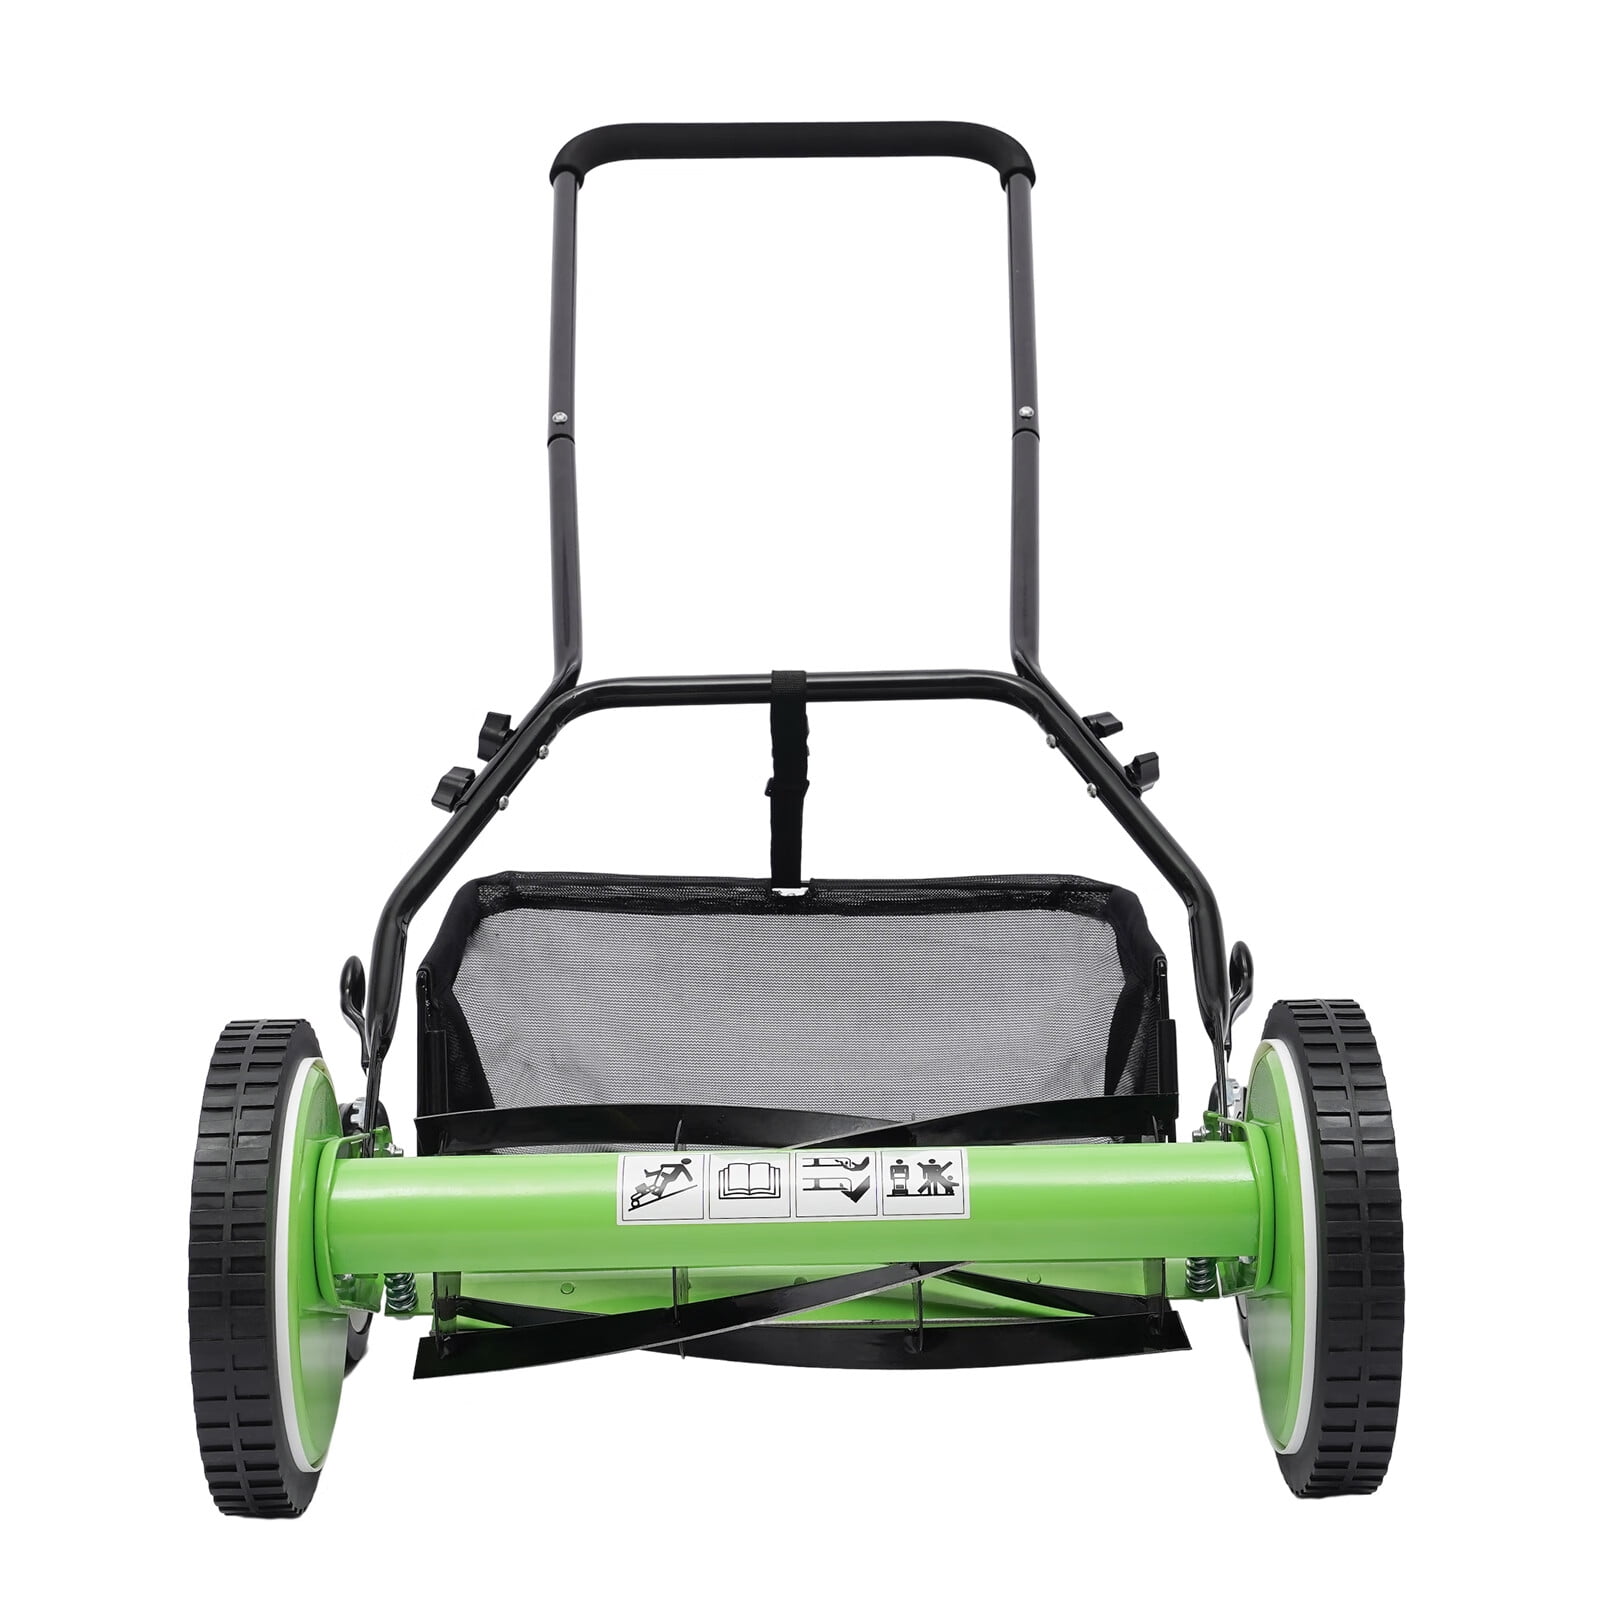  TBVECHI 20Inch Reel Mower with 5-Blades, Universal Manual Lawn  Mower w/Grass Catcher Adjustable Cutting Height Push Lawn Mower, Green :  Patio, Lawn & Garden